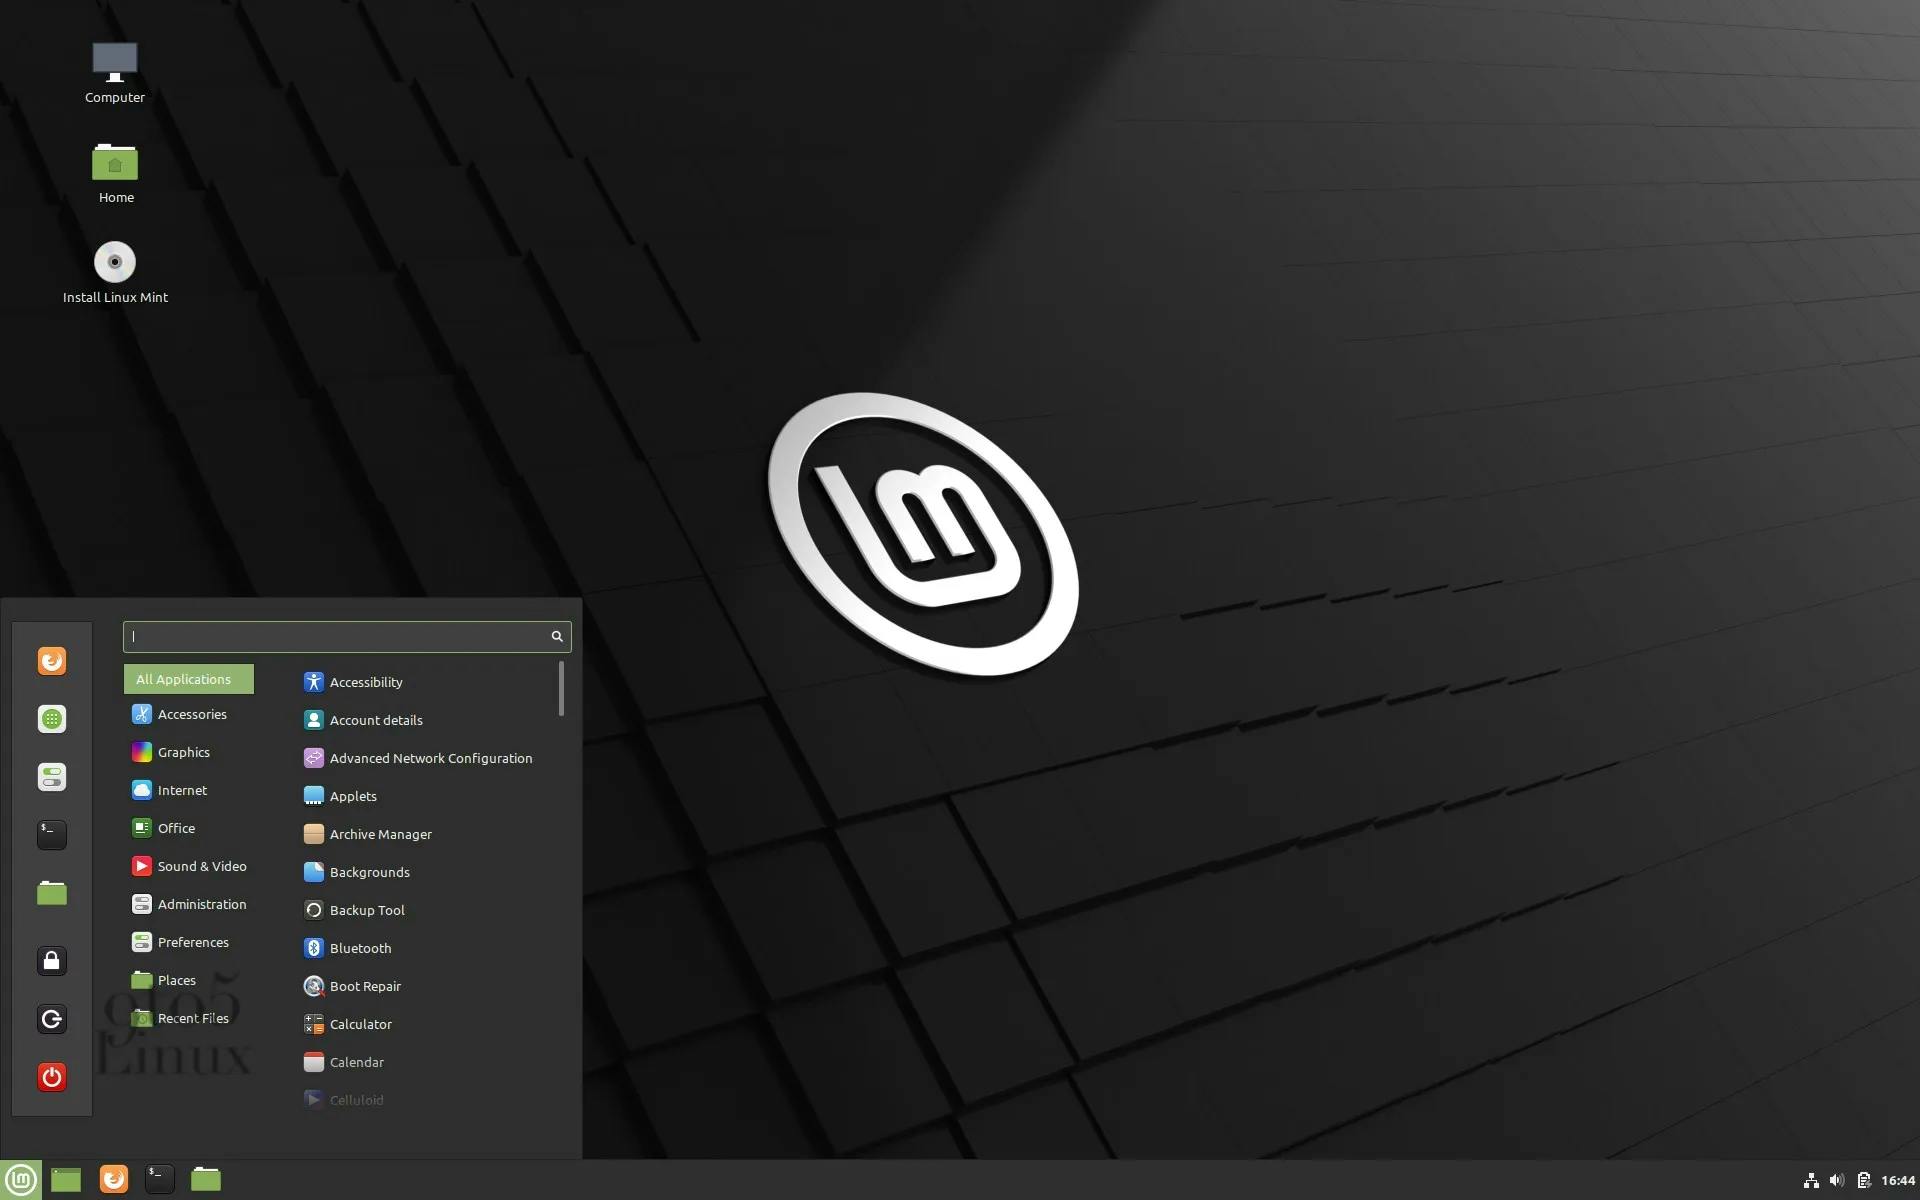 How to Upgrade from Linux Mint 20 to Linux Mint 20.1? Here’s How